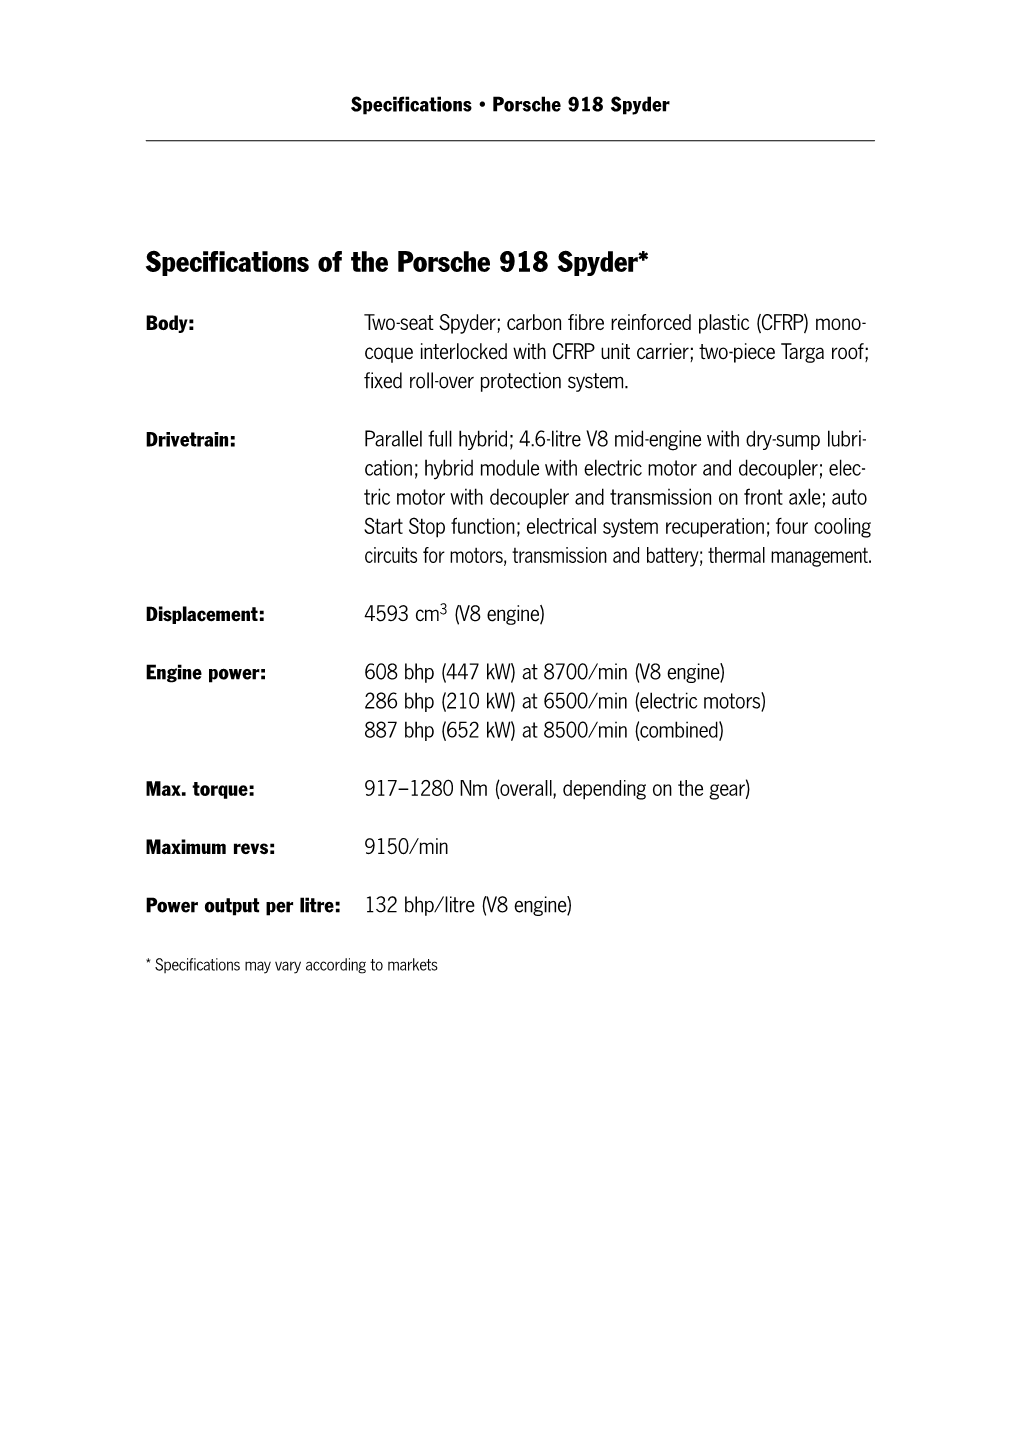 Specifications of the Porsche 918 Spyder*